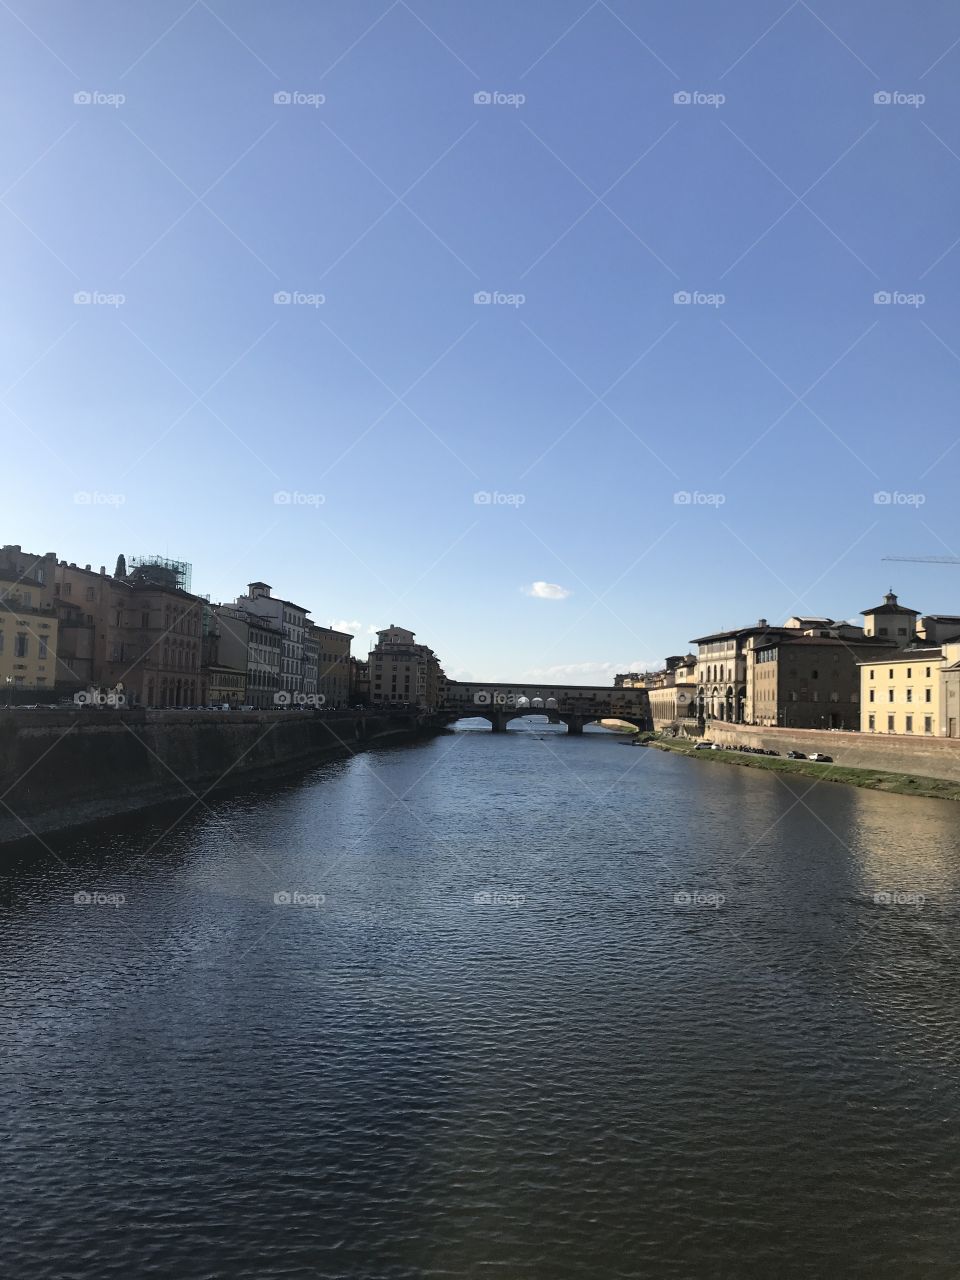 The Ponte Vecchio on the lovely Arno river in Florence, Italy on a beautiful sunny day.